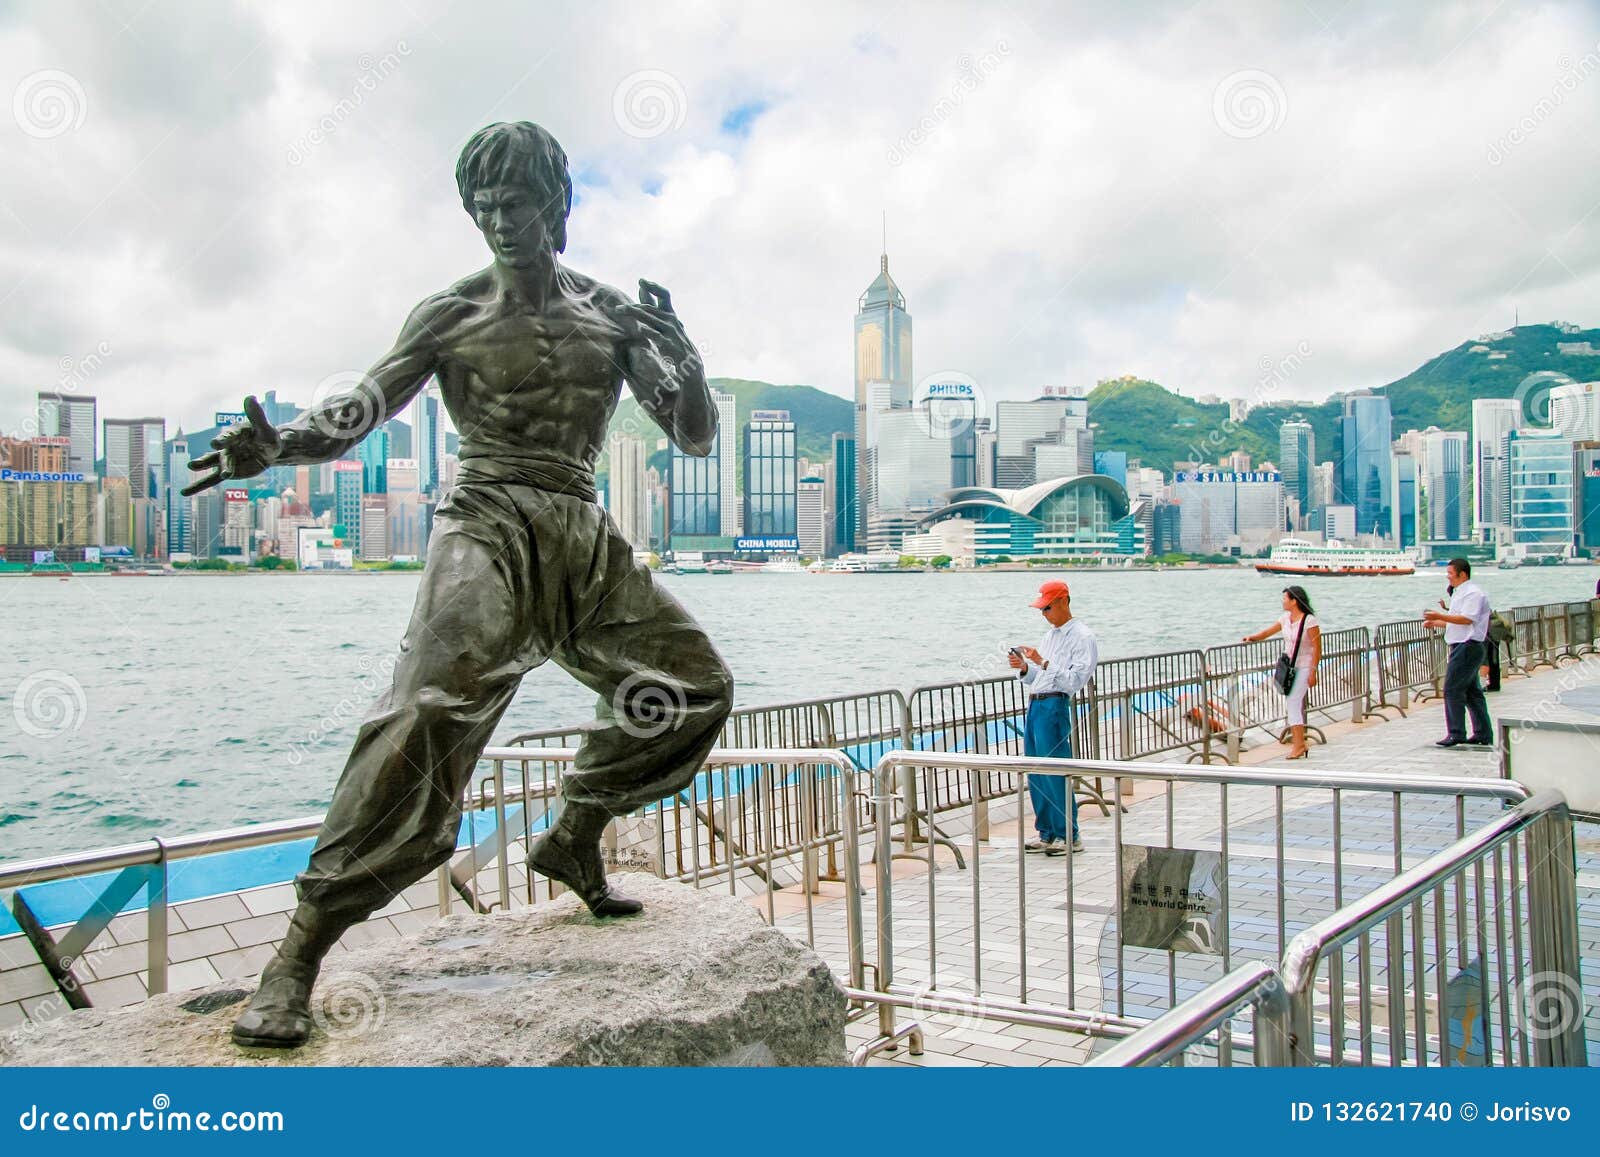 Bruce Lee Statue in Hong Kong Editorial Image - Image of movie, kowloon:  132621740